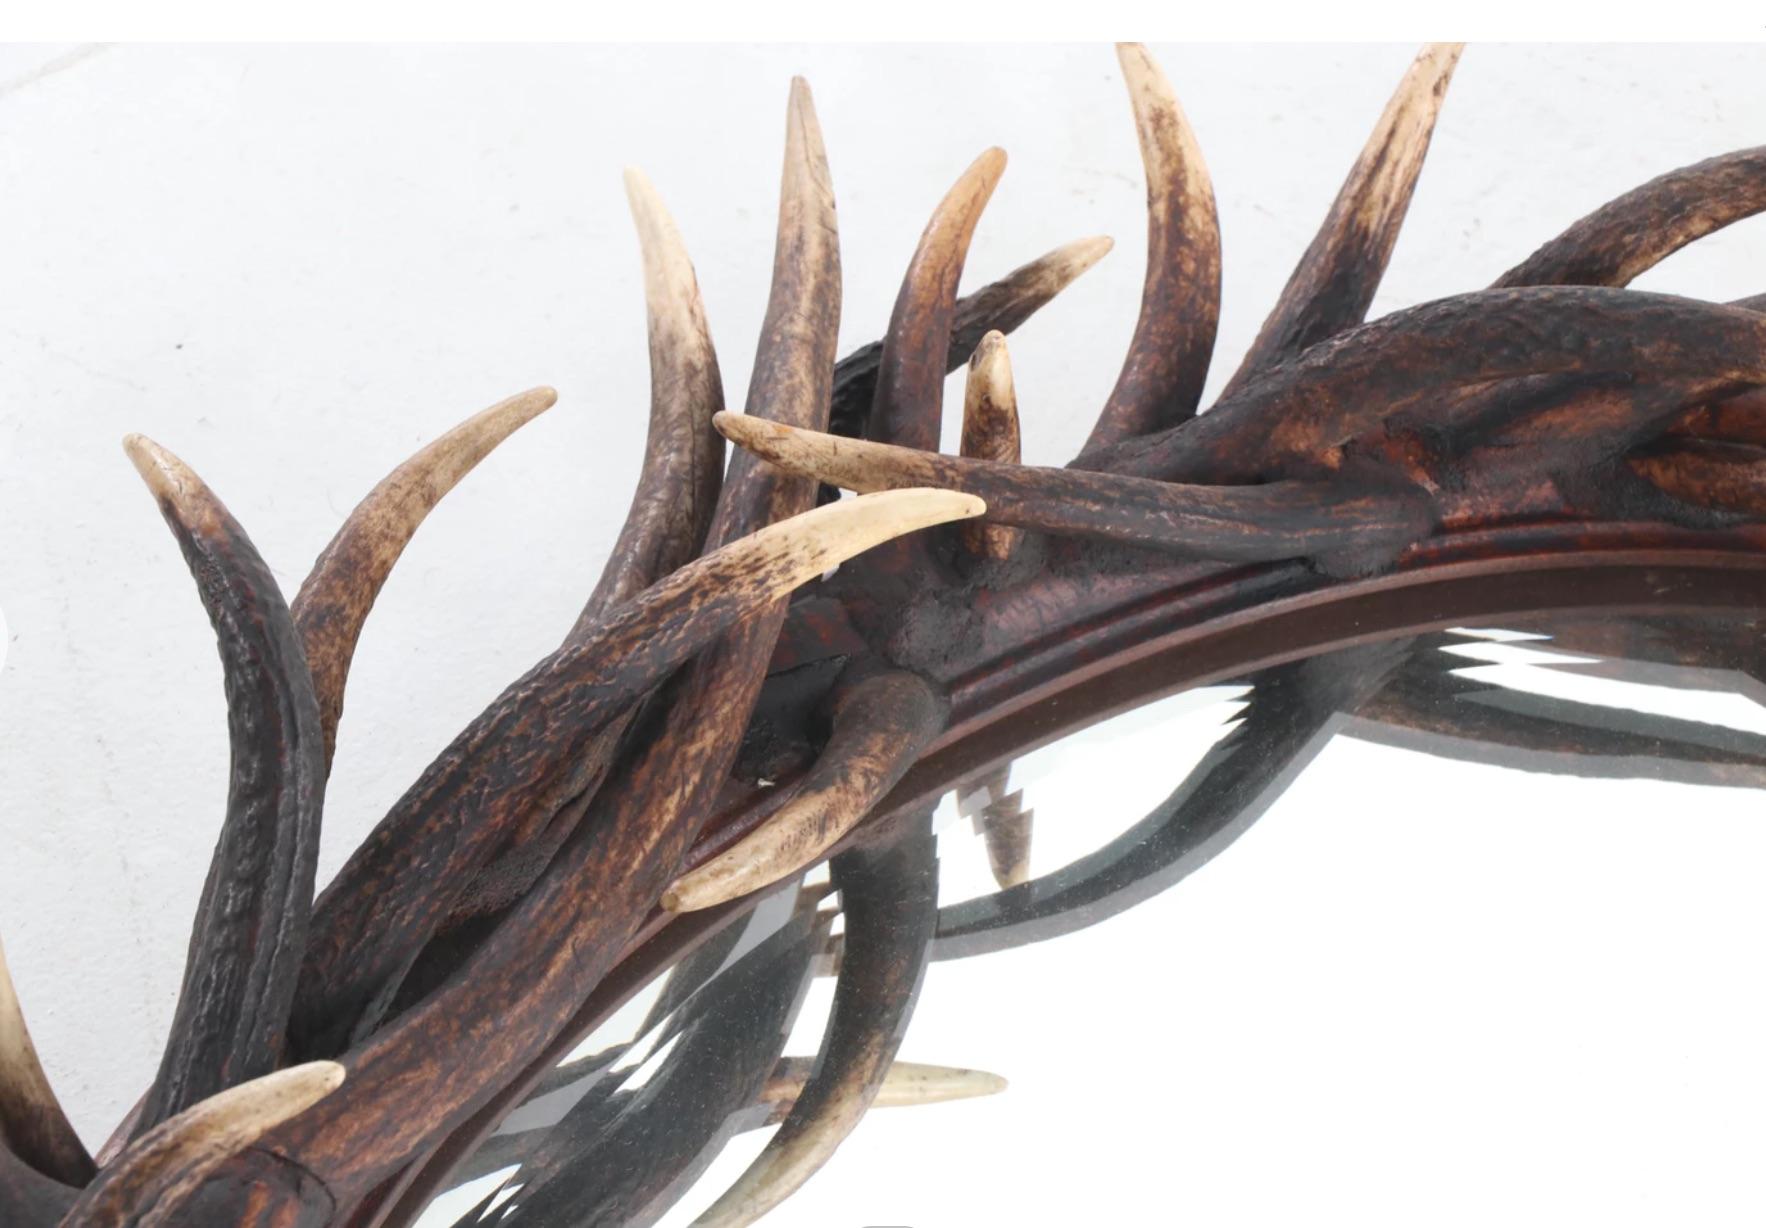  'Black Forest' Oval Antler Mounted Mirror, Early to Mid-20th Century For Sale 1